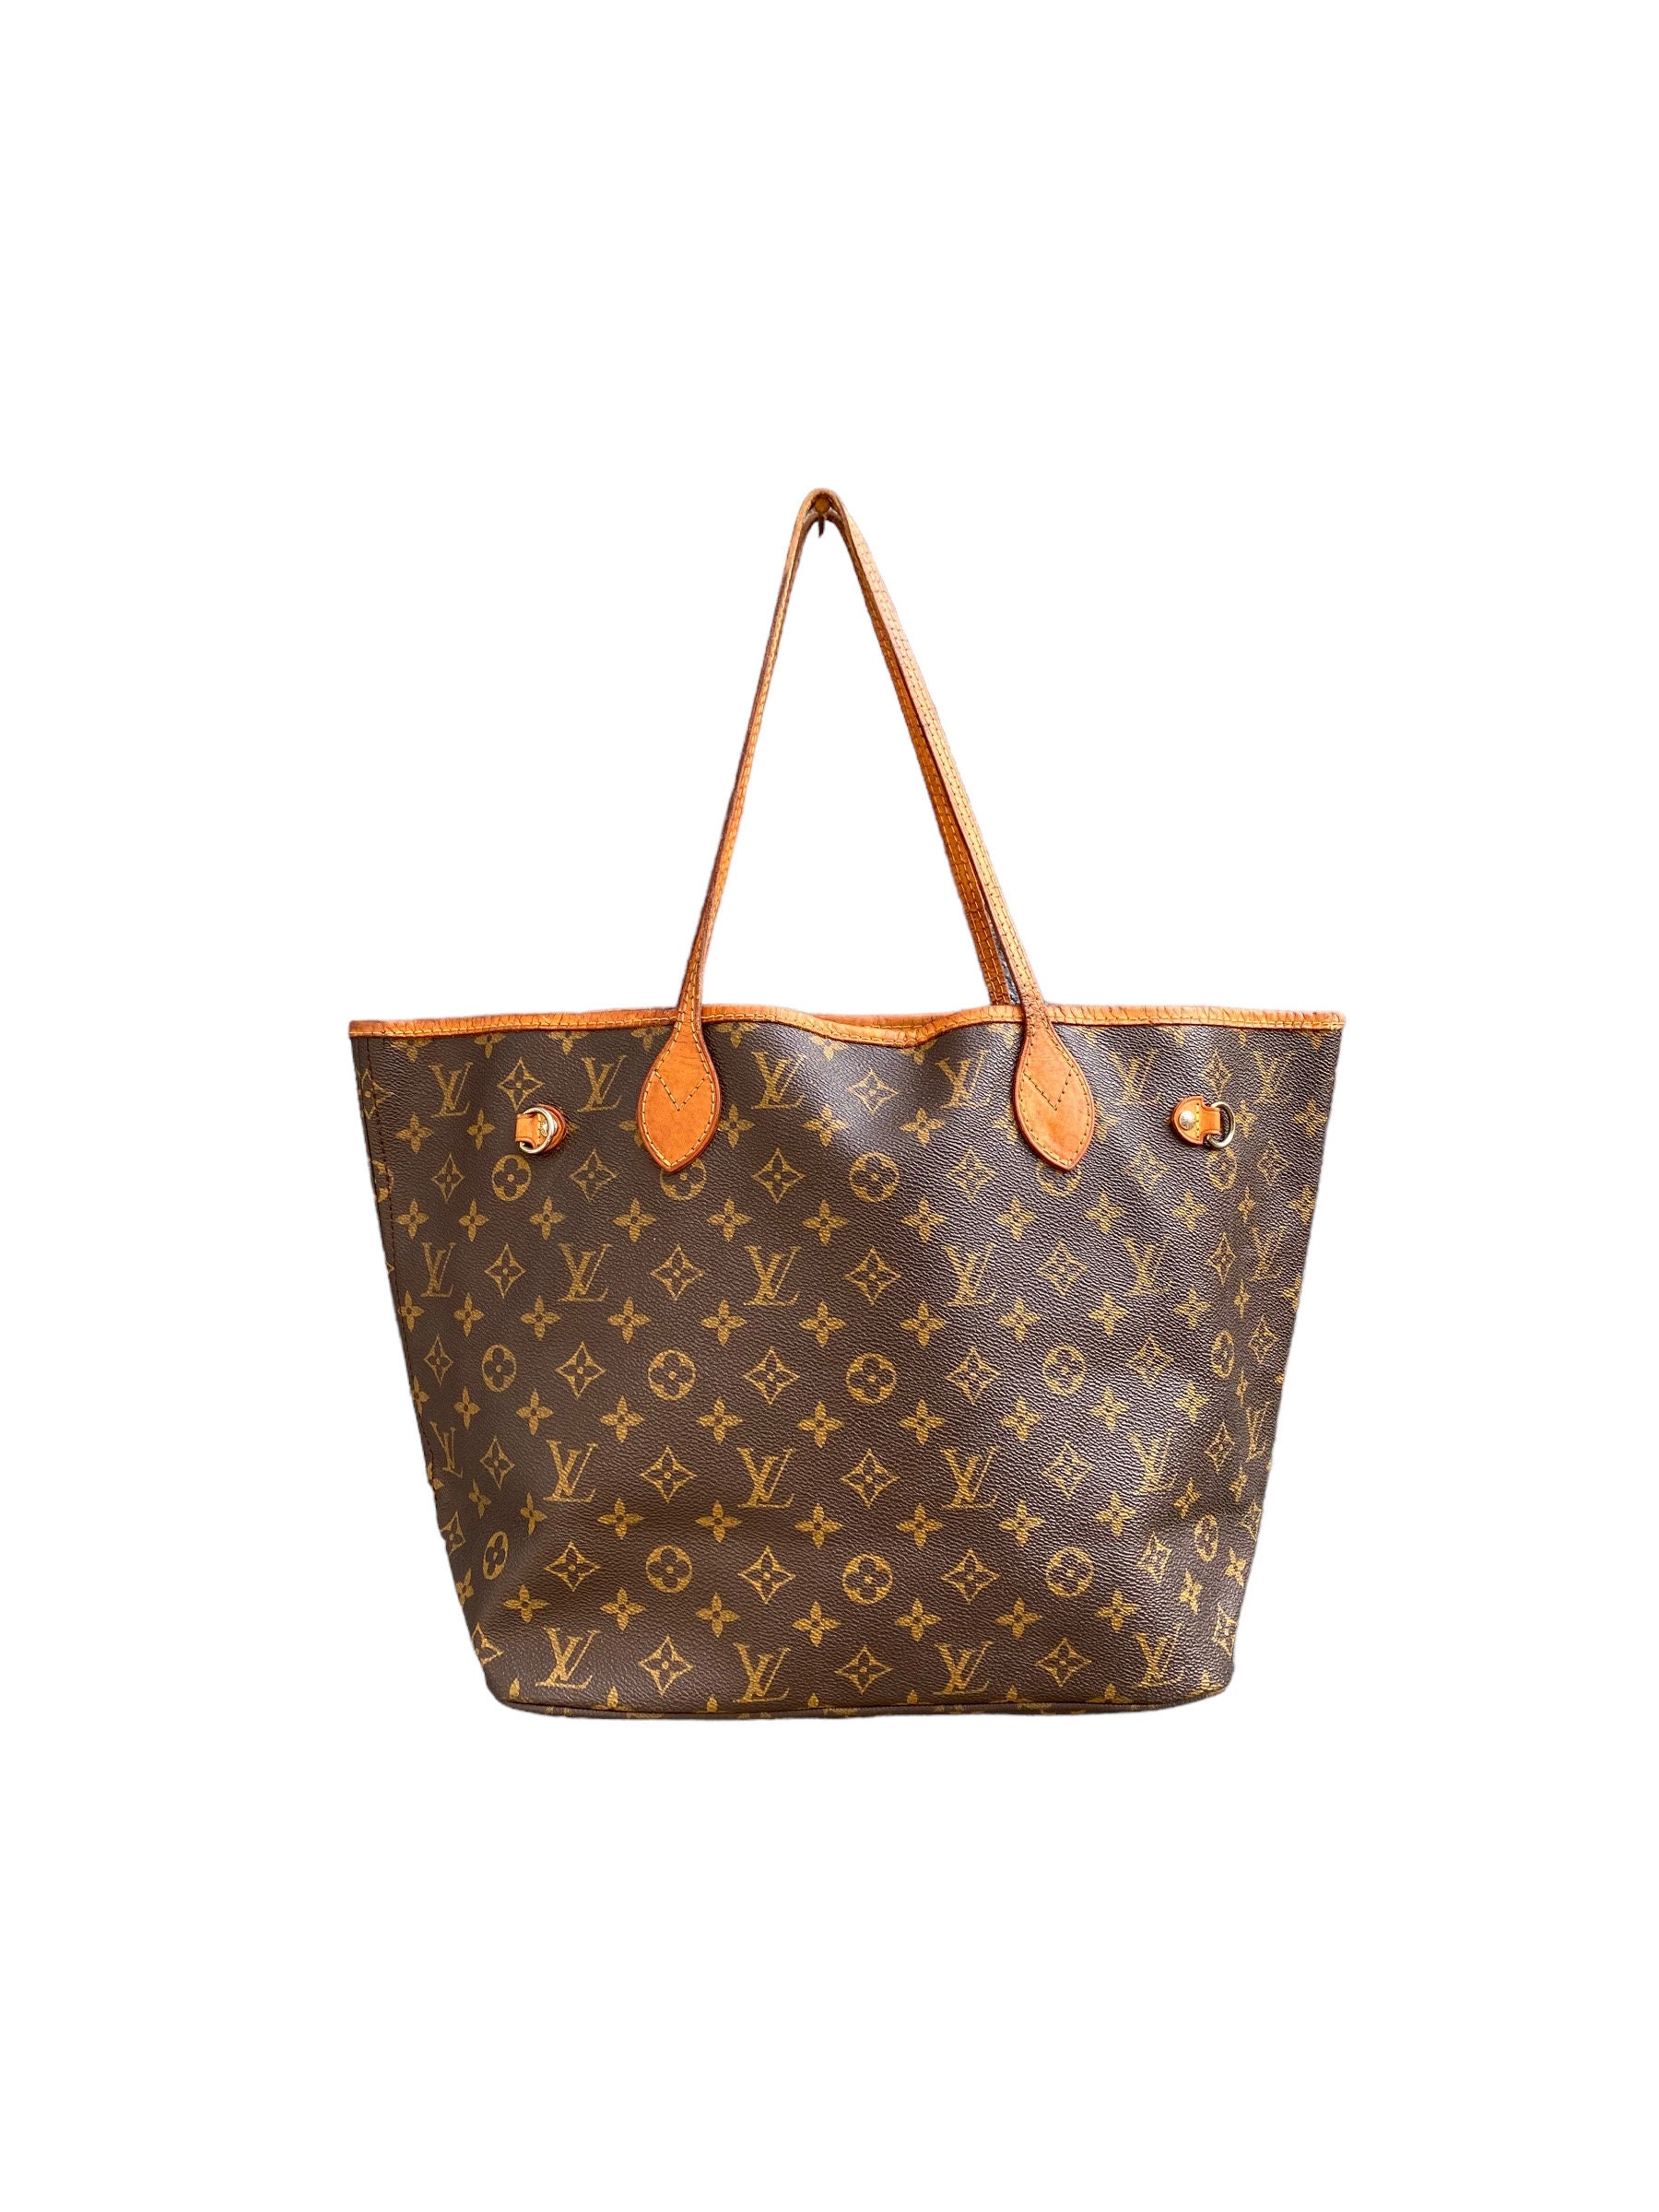 authentic neverfull louis